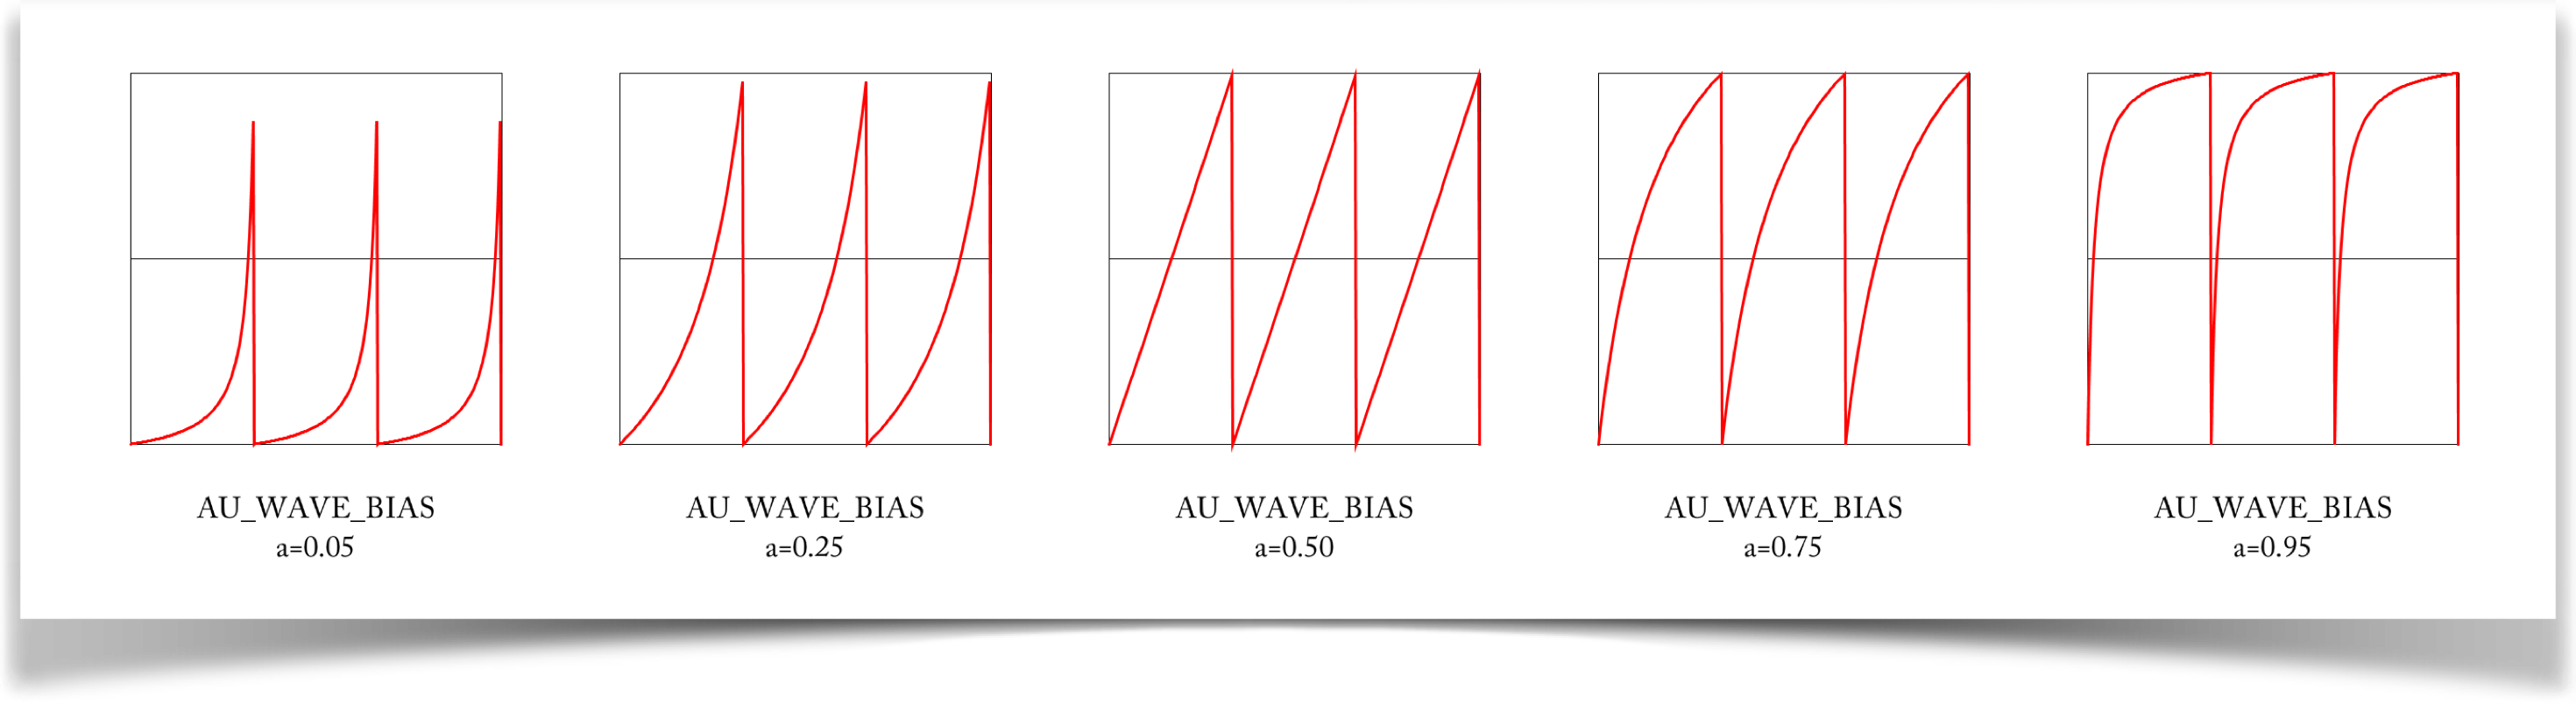 The bias wave